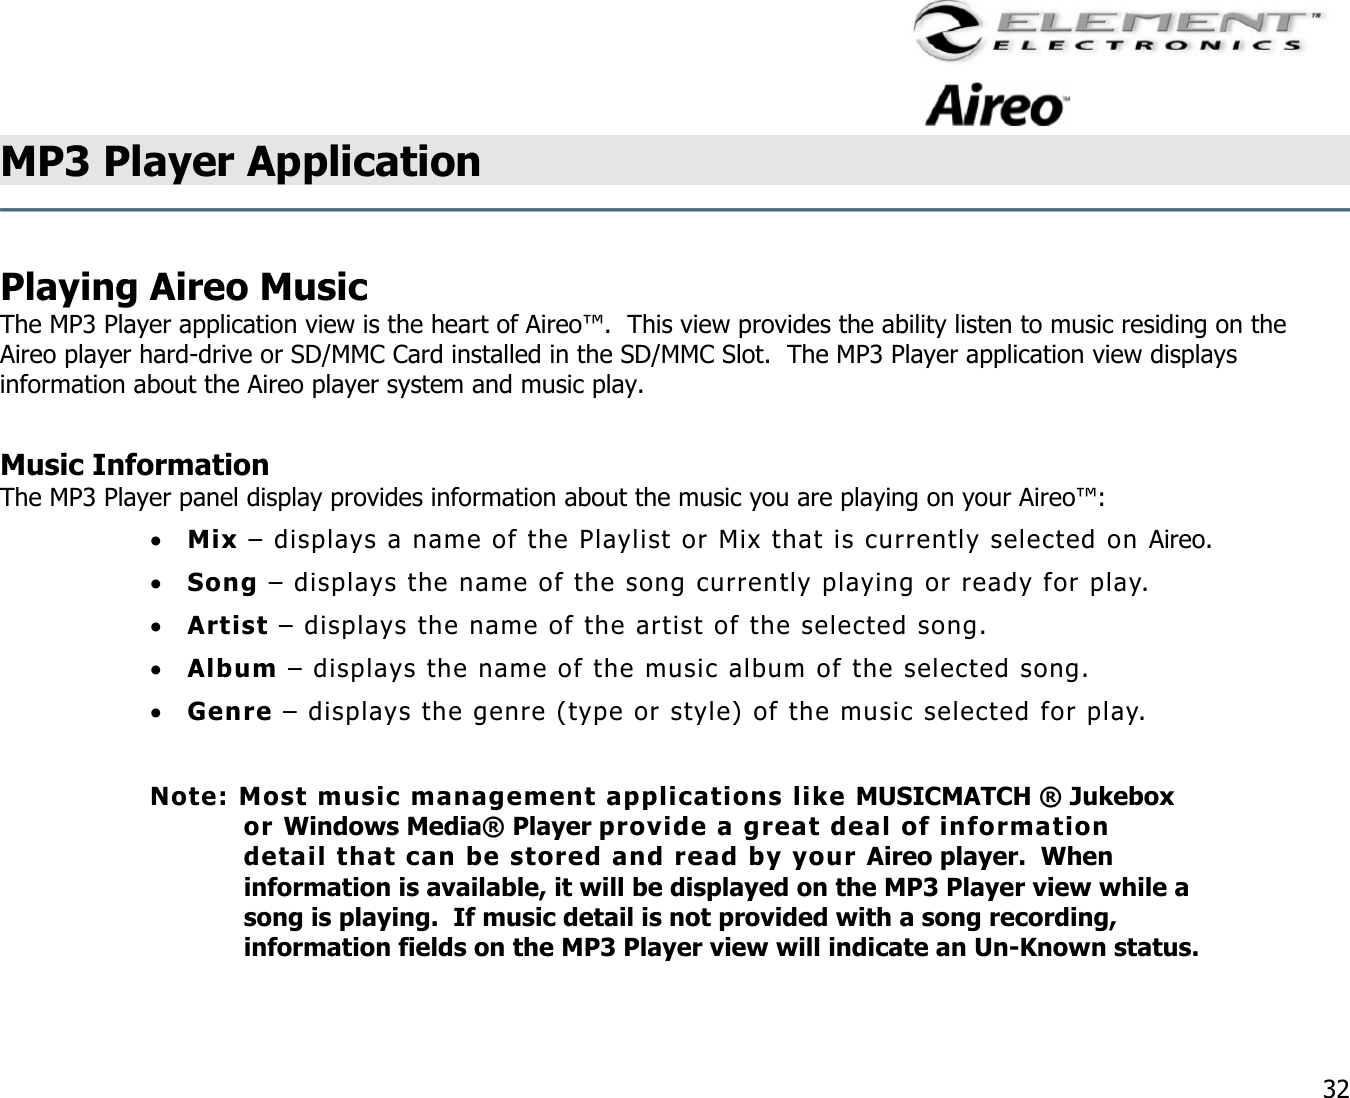                                                                                    32 MP3 Player Application     Playing Aireo Music The MP3 Player application view is the heart of Aireo™.  This view provides the ability listen to music residing on the Aireo player hard-drive or SD/MMC Card installed in the SD/MMC Slot.  The MP3 Player application view displays information about the Aireo player system and music play.  Music Information The MP3 Player panel display provides information about the music you are playing on your Aireo™: •  Mix – displays a name of the Playlist or Mix that is currently selected on Aireo. •  Song – displays the name of the song currently playing or ready for play. •  Artist – displays the name of the artist of the selected song. •  Album – displays the name of the music album of the selected song. •  Genre – displays the genre (type or style) of the music selected for play.  Note: Most music management applications like MUSICMATCH ® Jukebox or Windows Media® Player provide a great deal of information detail that can be stored and read by your Aireo player.  When information is available, it will be displayed on the MP3 Player view while a song is playing.  If music detail is not provided with a song recording, information fields on the MP3 Player view will indicate an Un-Known status.  